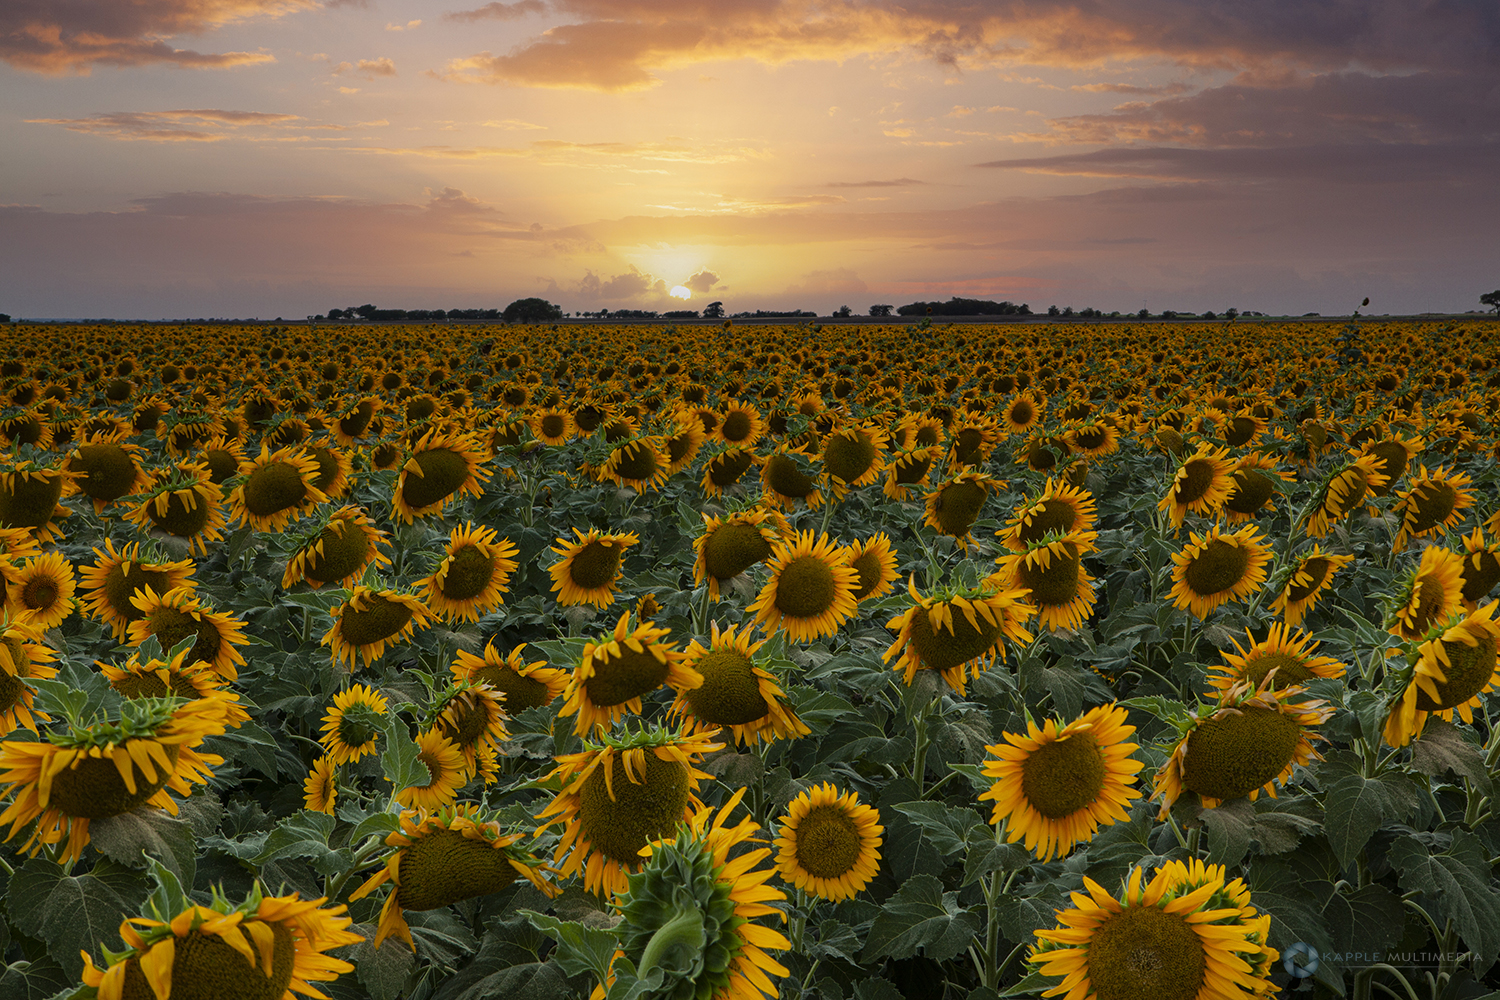 Sunflowers in Texas